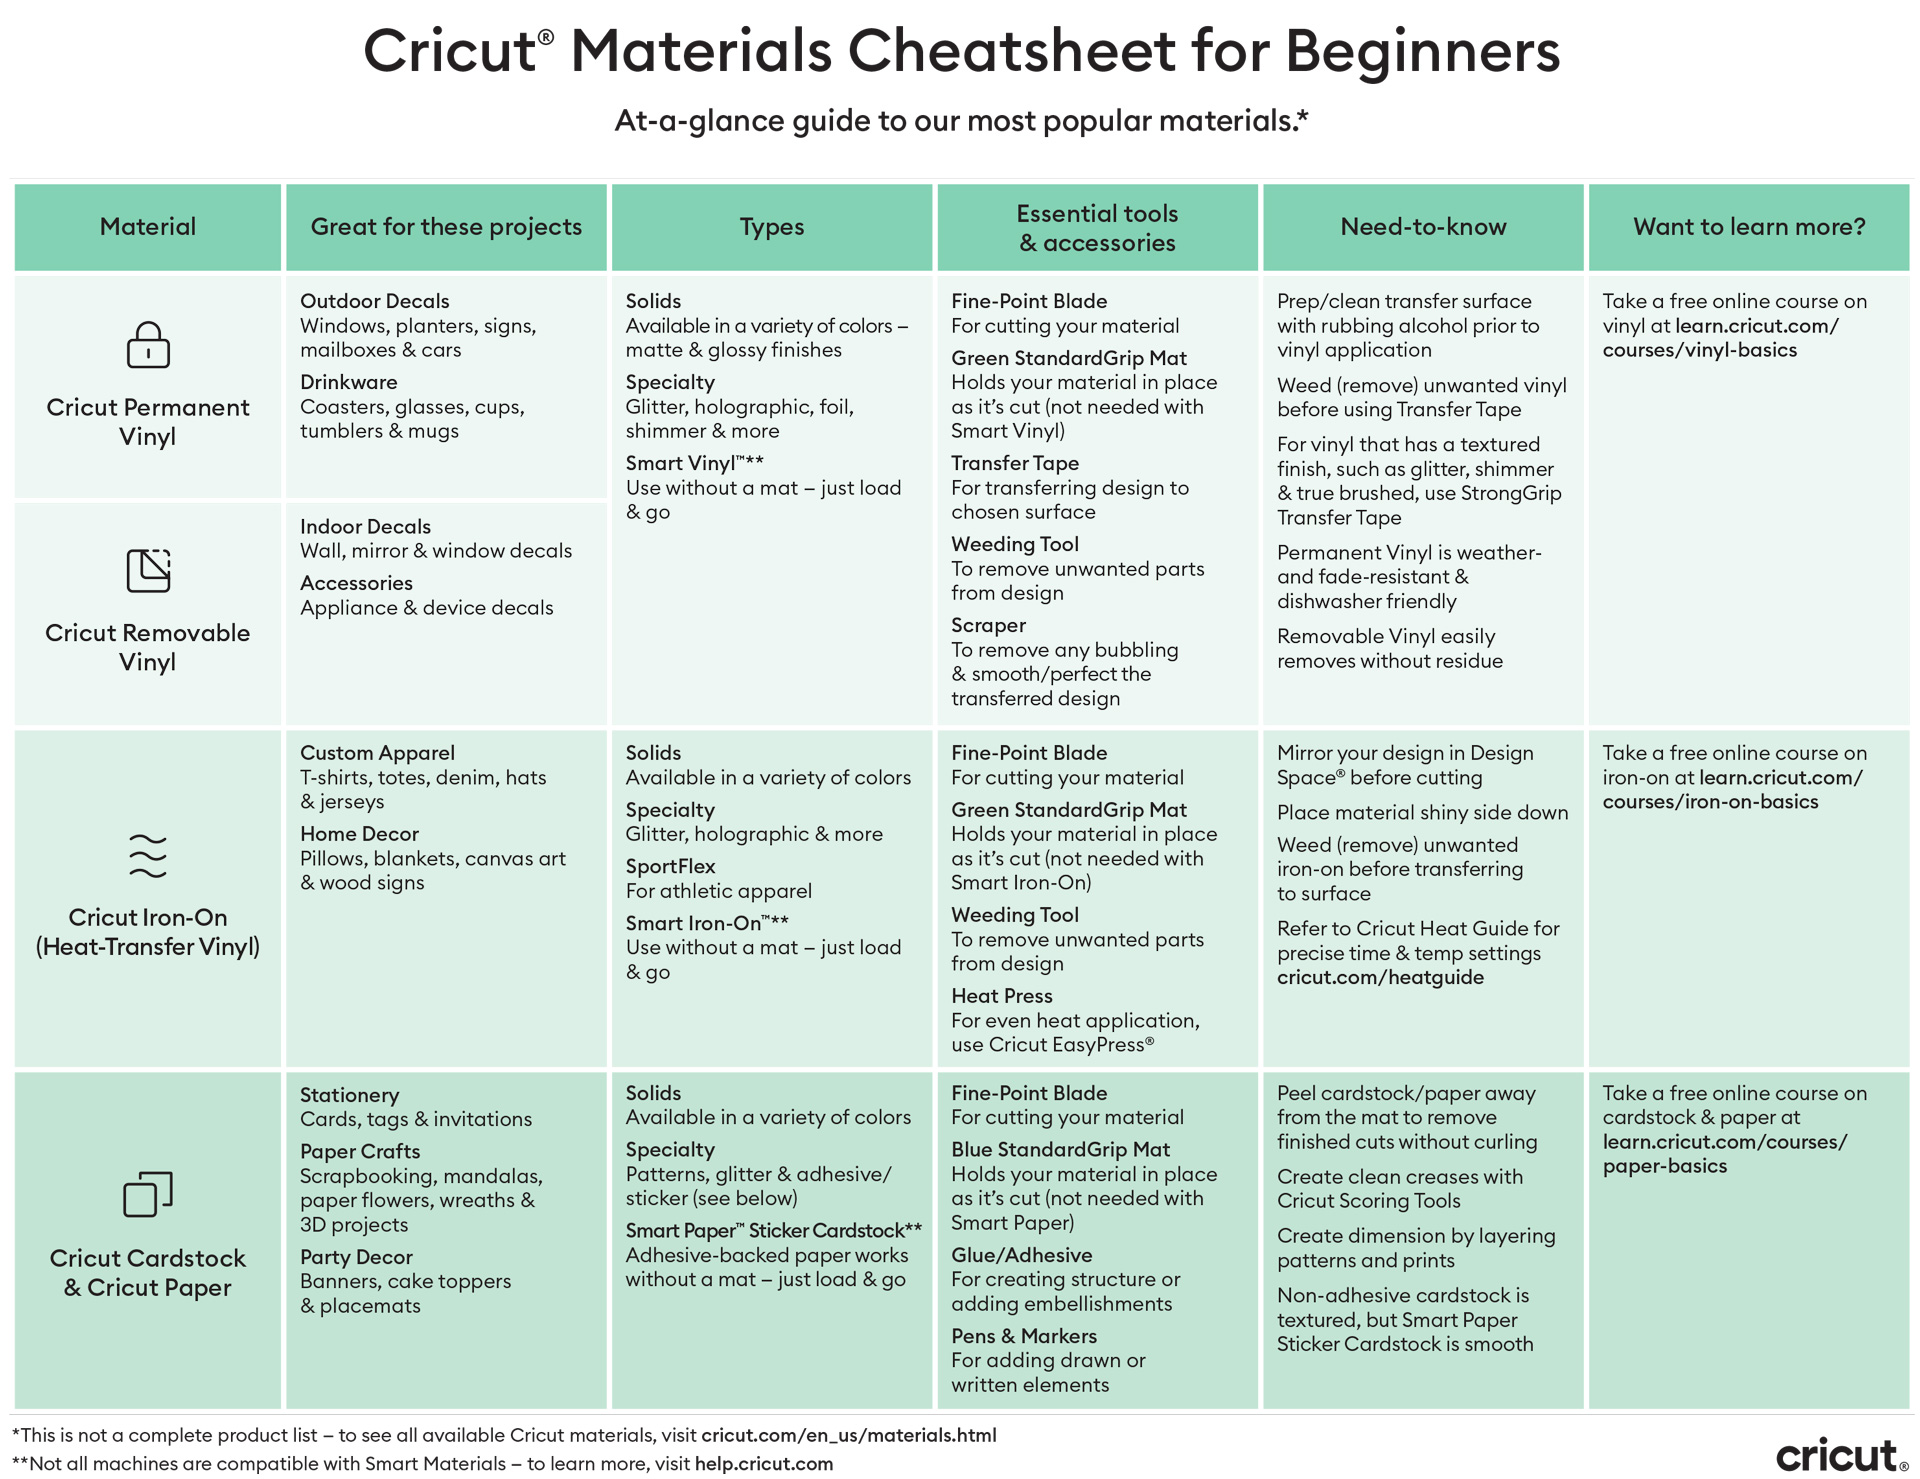 Printable Cheat Sheets for Cricut Tools & Accessories Beginners Guide PDF  Instant Download 